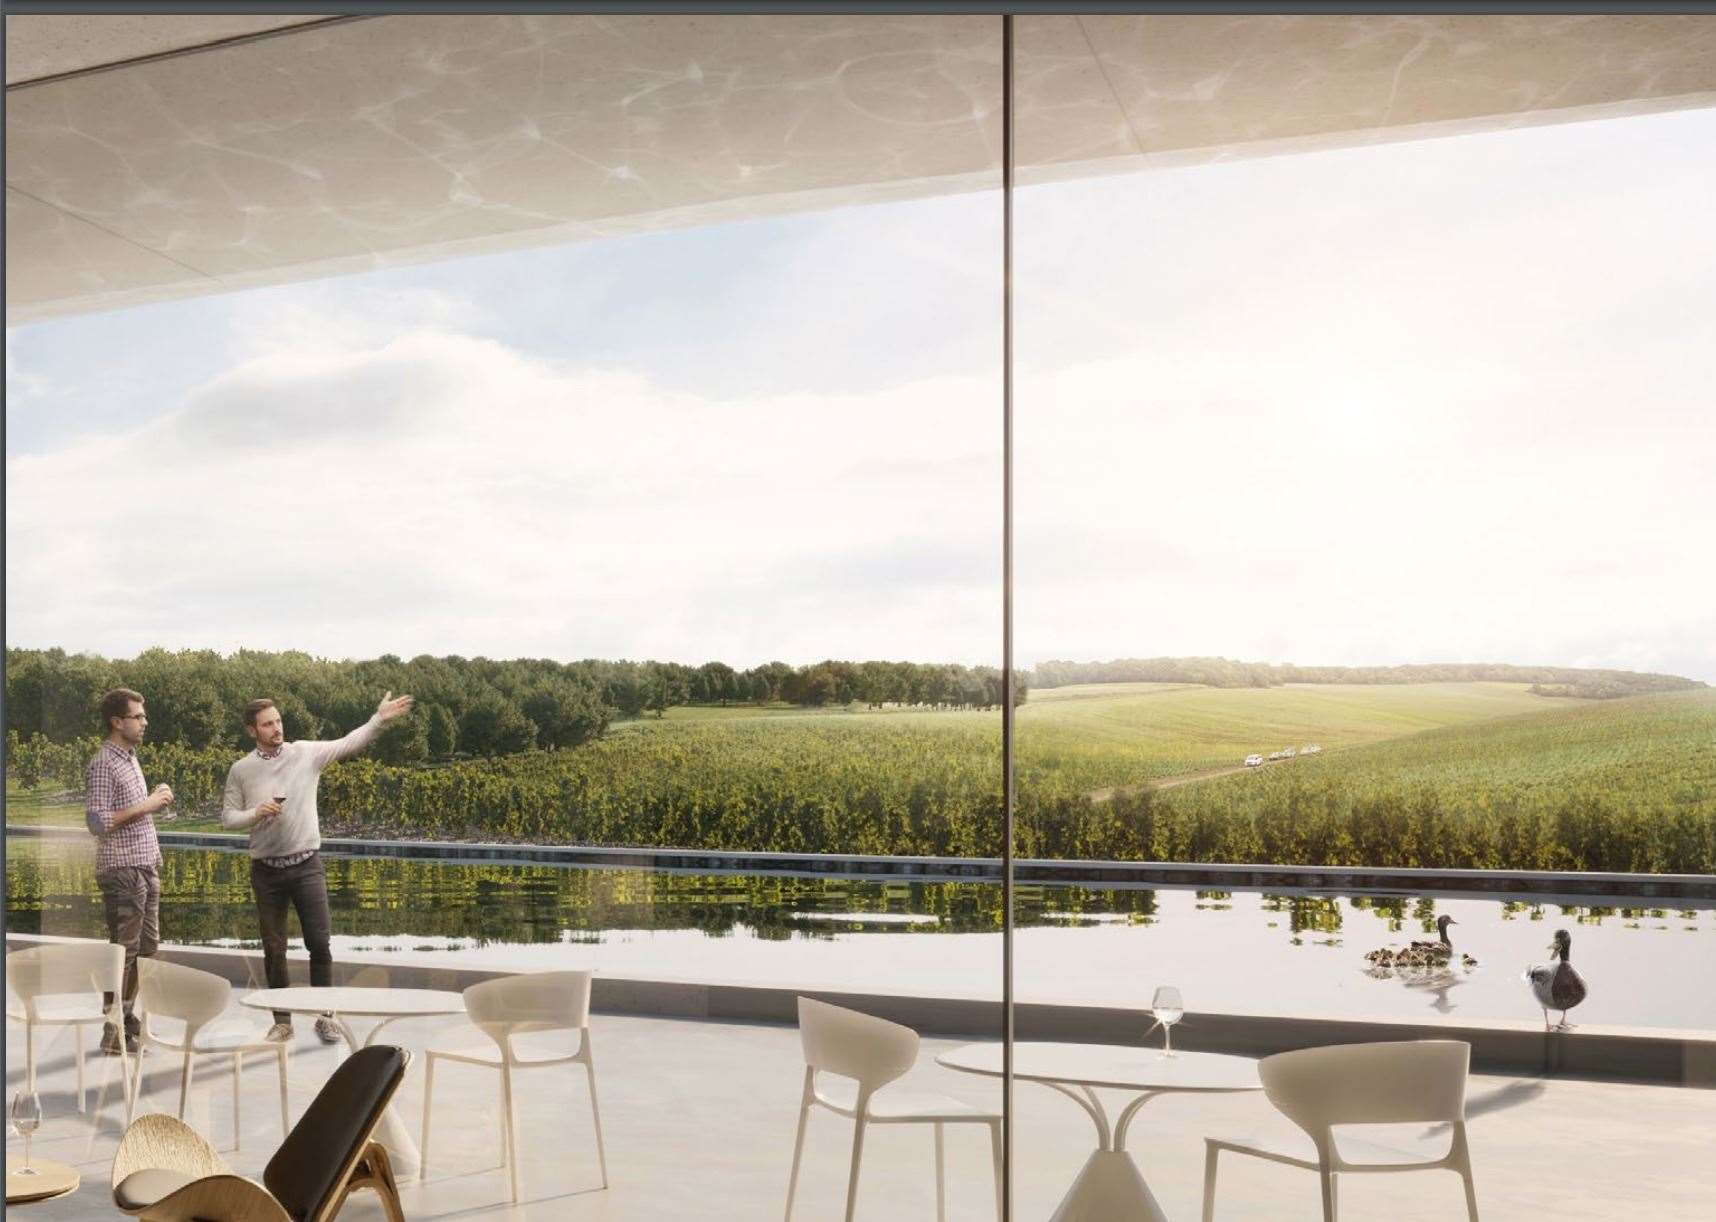 Vineyard Farms Ltd have applied to Medway Council to build a winery in Cuxton. Picture: Vineyard Farms Ltd/ Foster + Partners